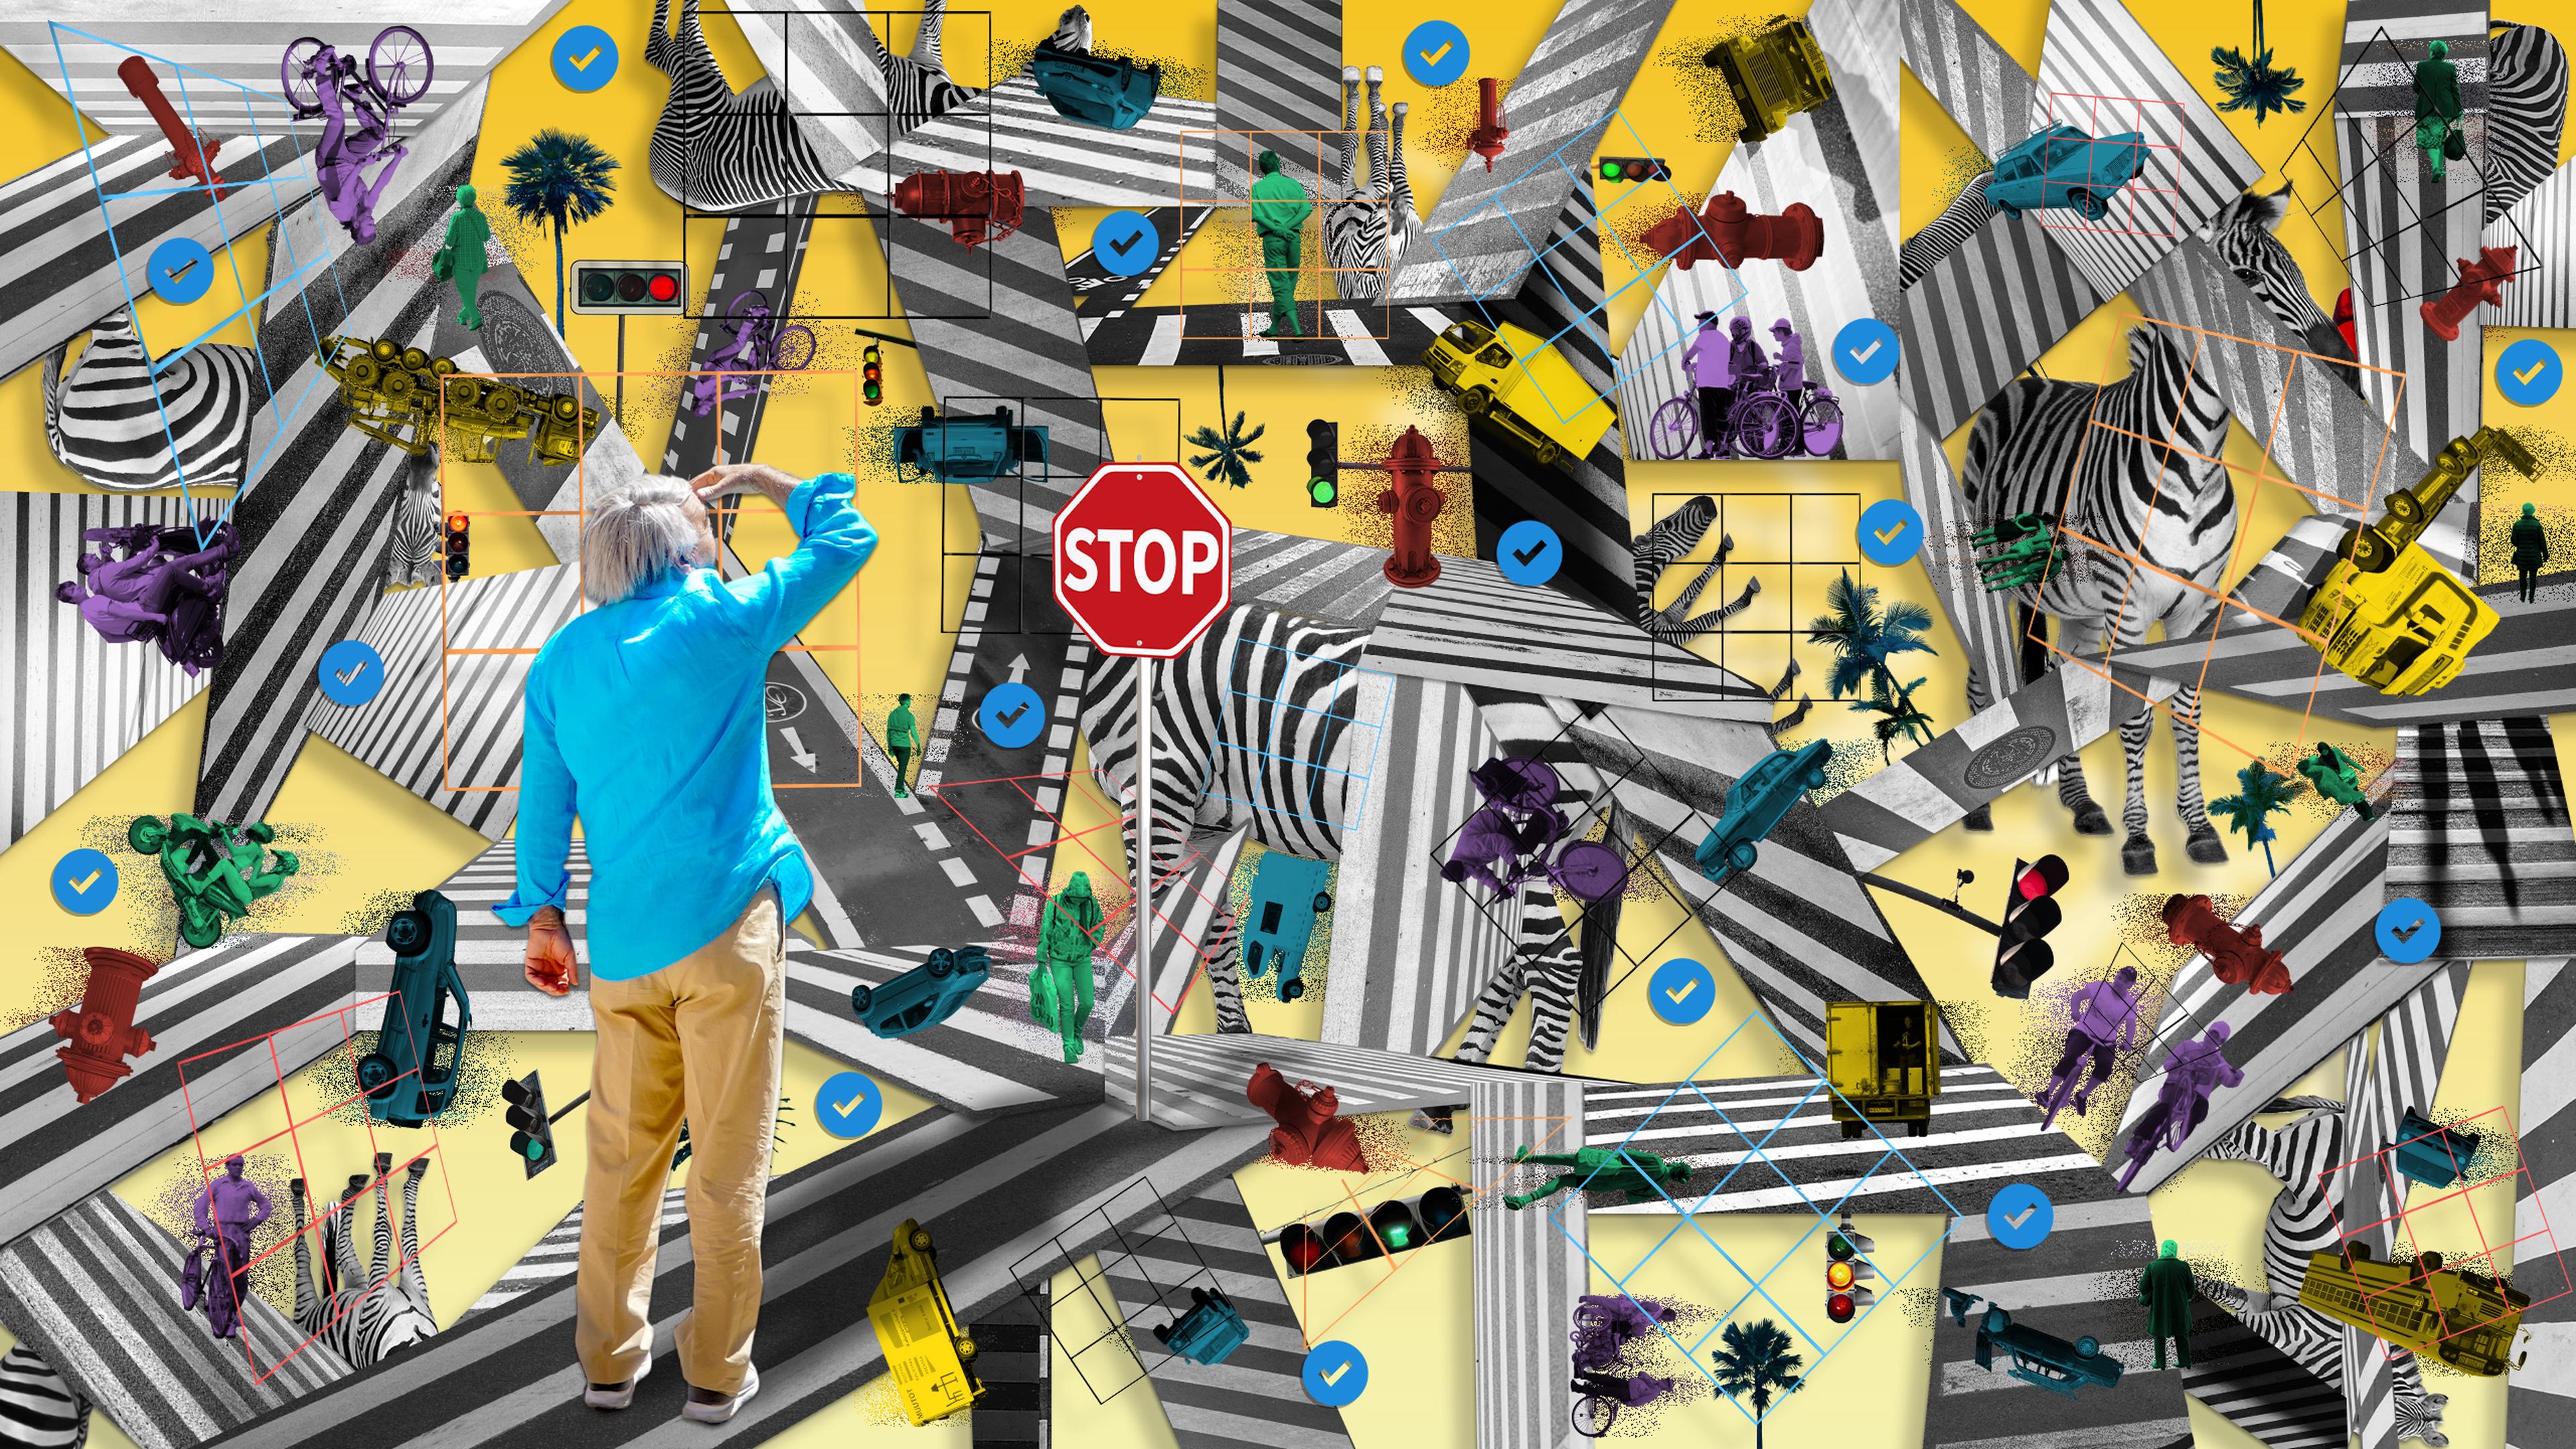 A collage picturing a chaotic intersection filled with reCAPTCHA items like crosswalks, fire hydrants and traffic lights, representing the unseen labor in data labelling.